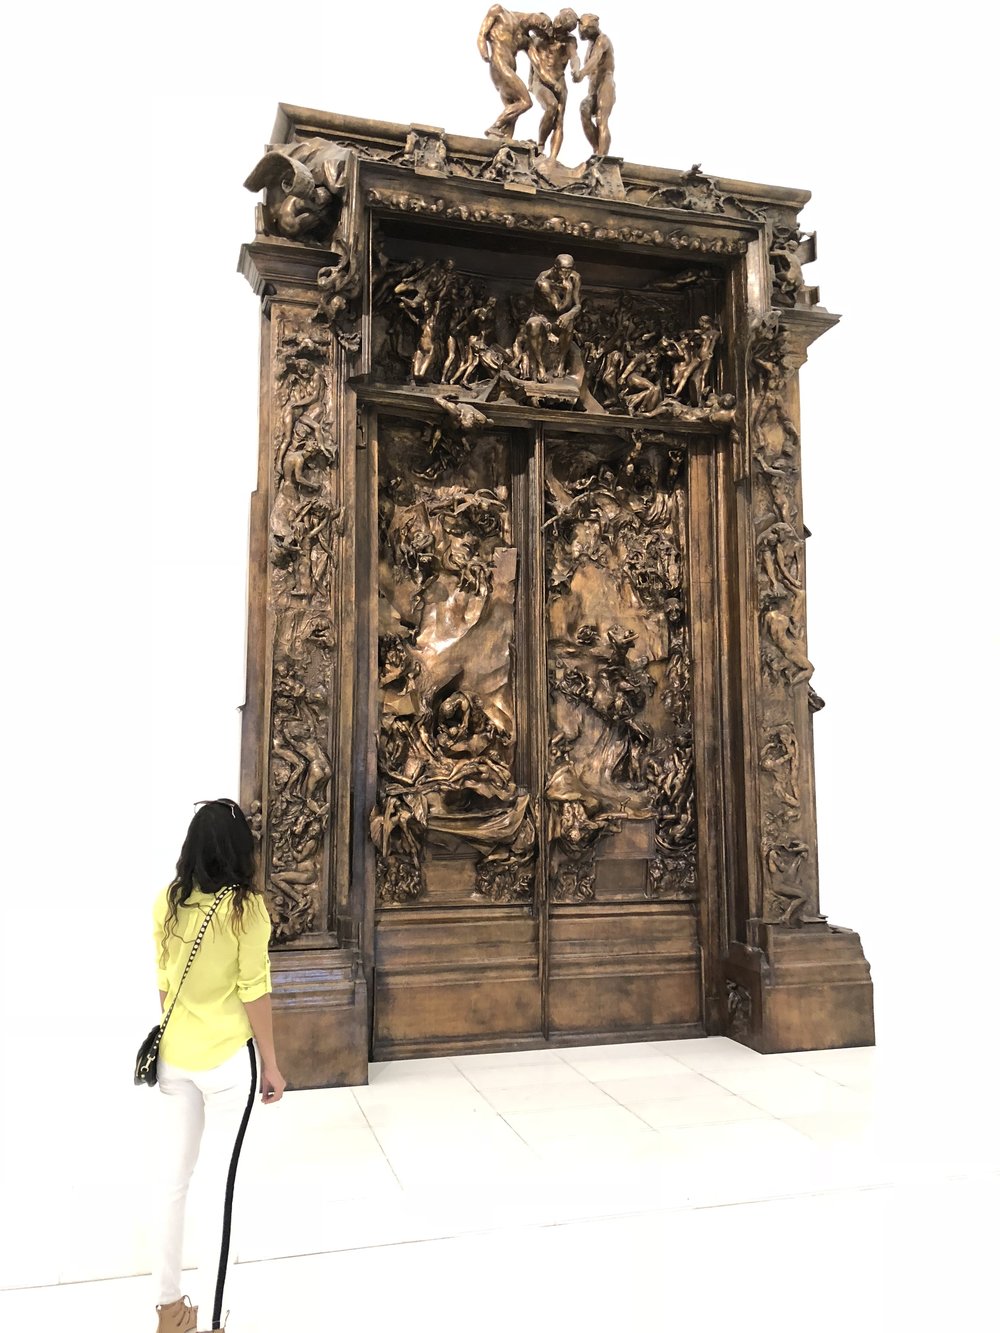 Rodin's "The Gates of Hell"